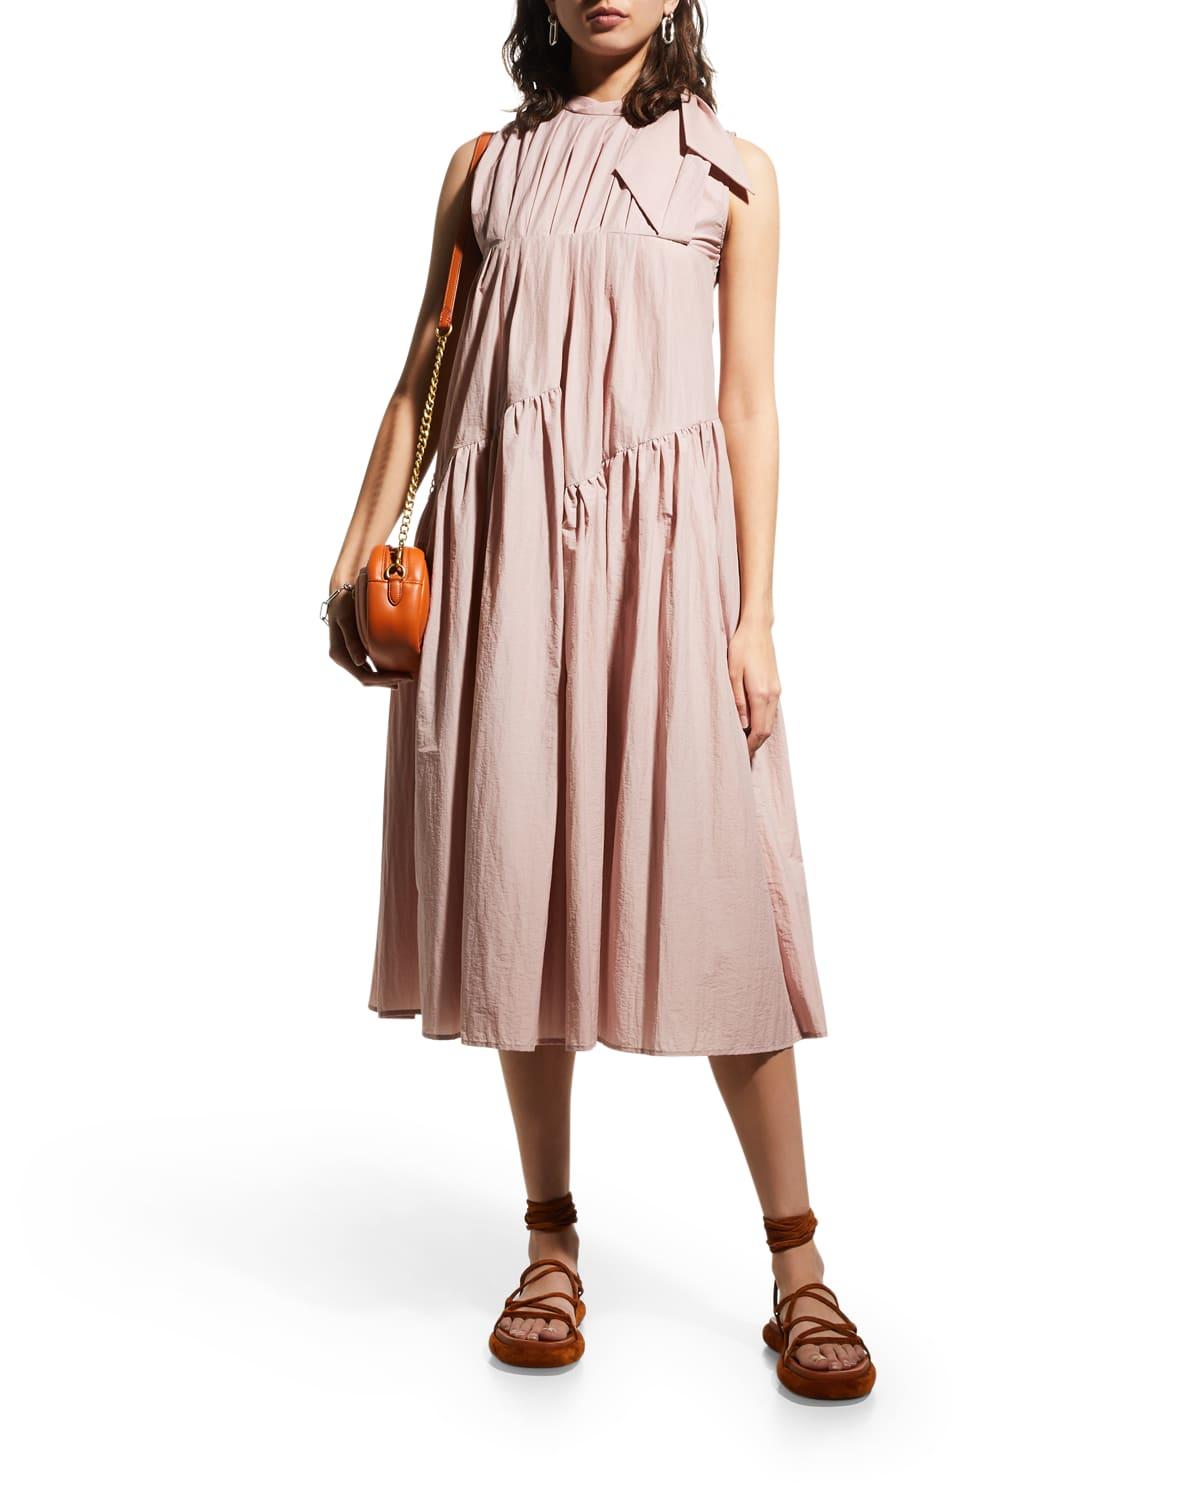 Dawei Studio Ruched Sleeveless Dress W/ Bow in Pink | Lyst